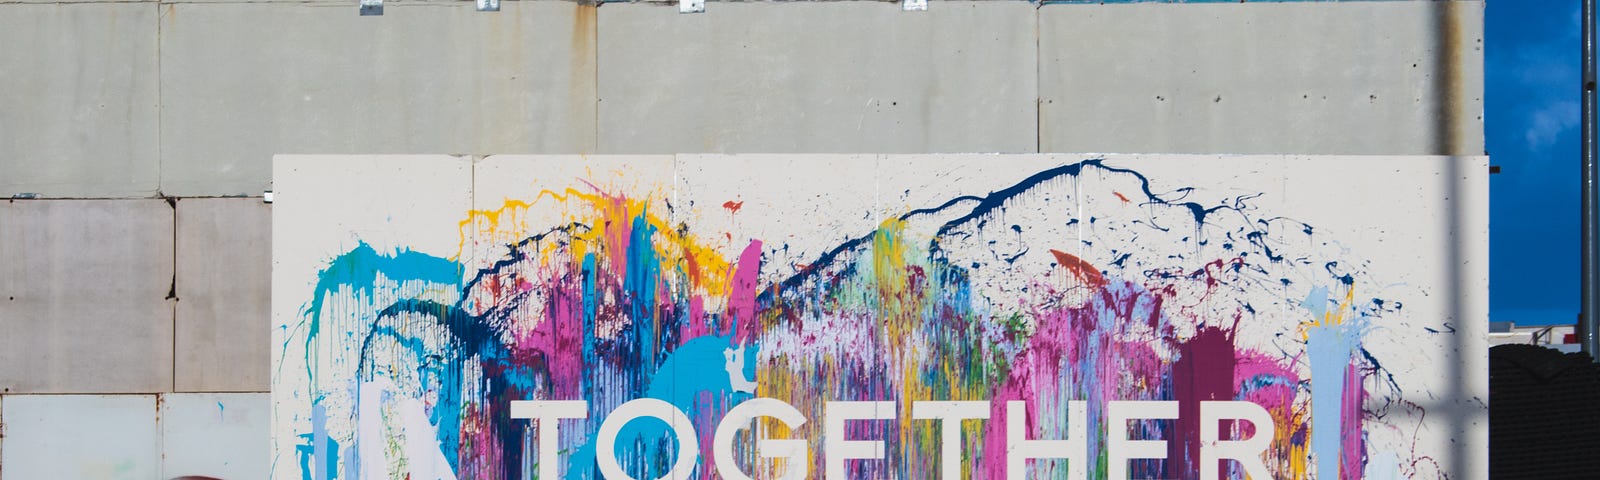 a concrete wall painted white on the lower side , splashed with colours like pink blue purple yellow and green. Written in block letters in white colour “together” on it.